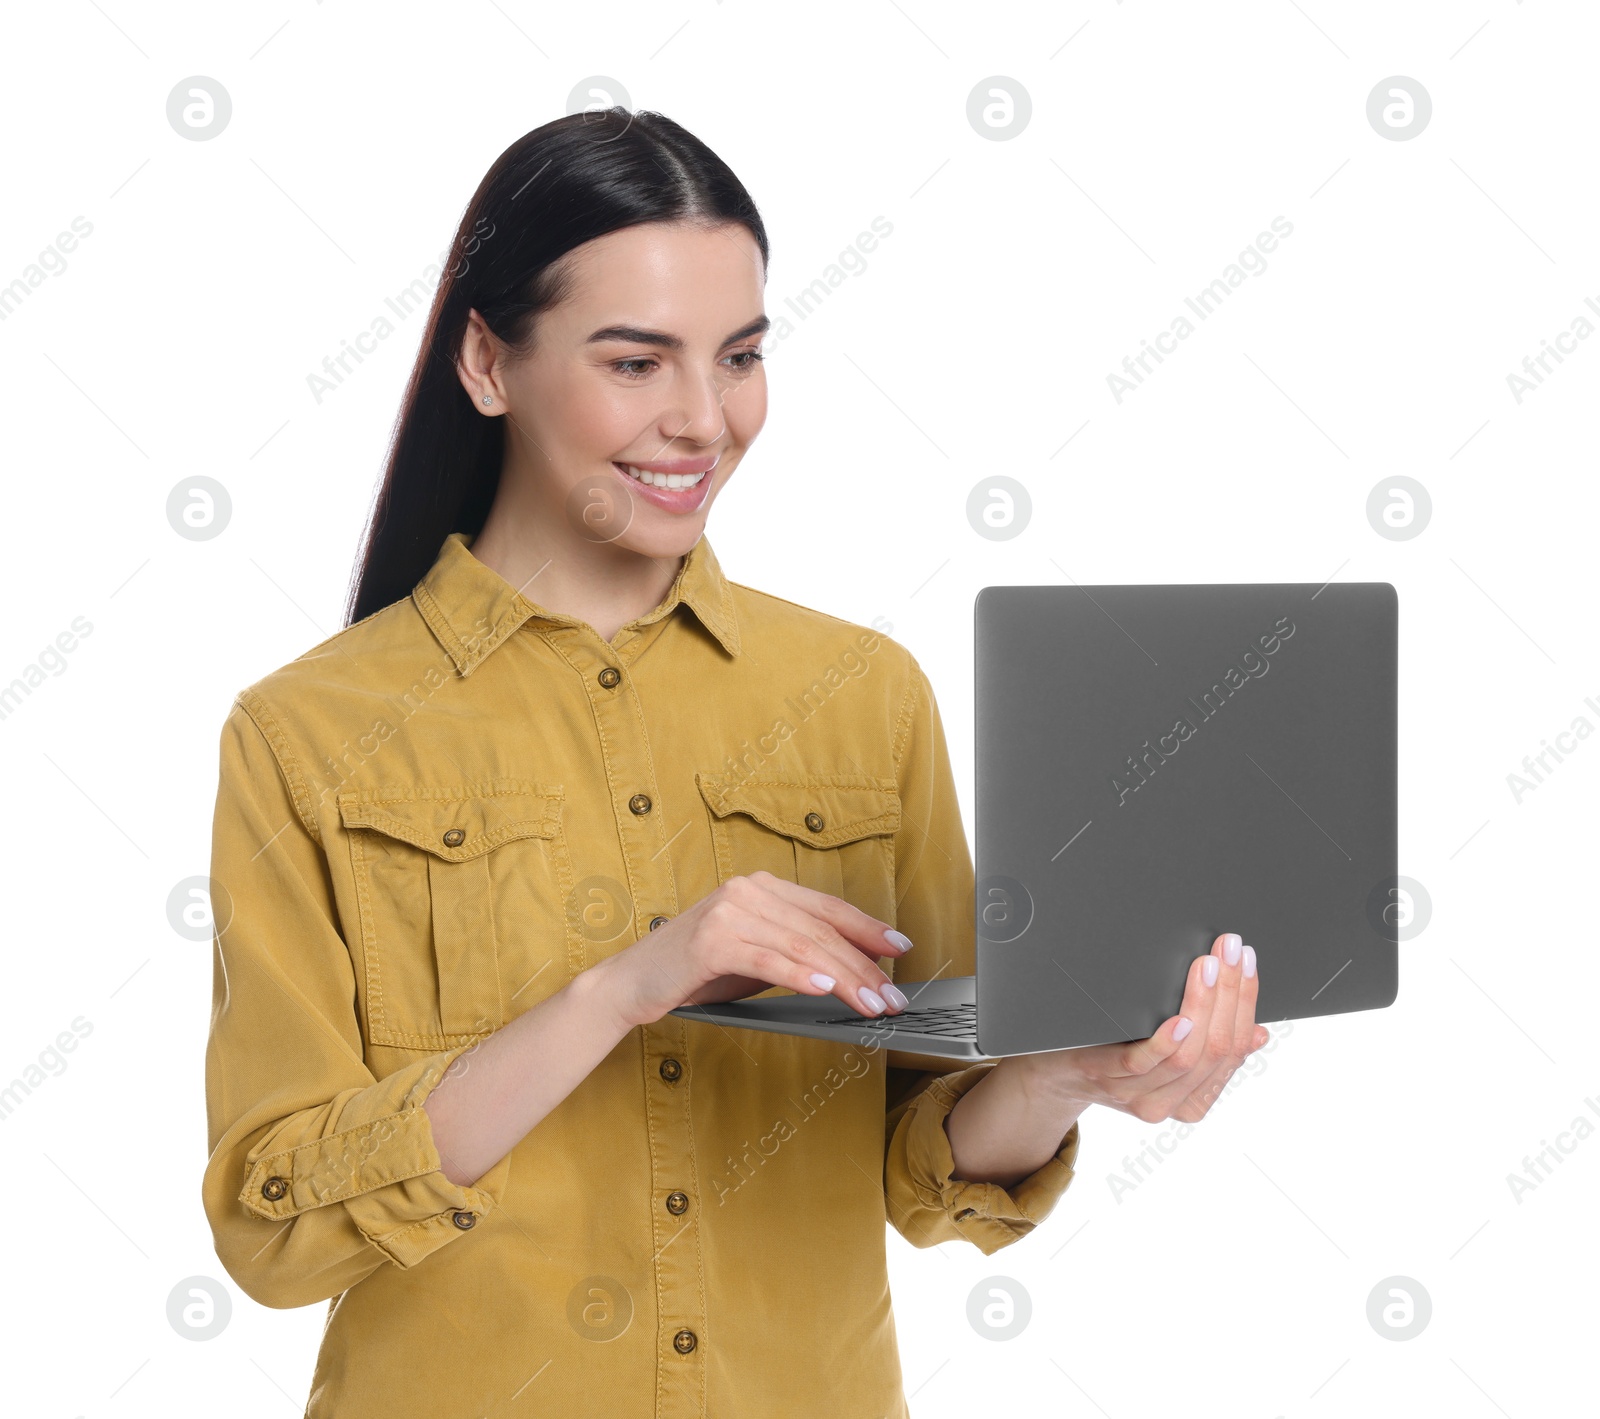 Photo of Happy woman using laptop on white background